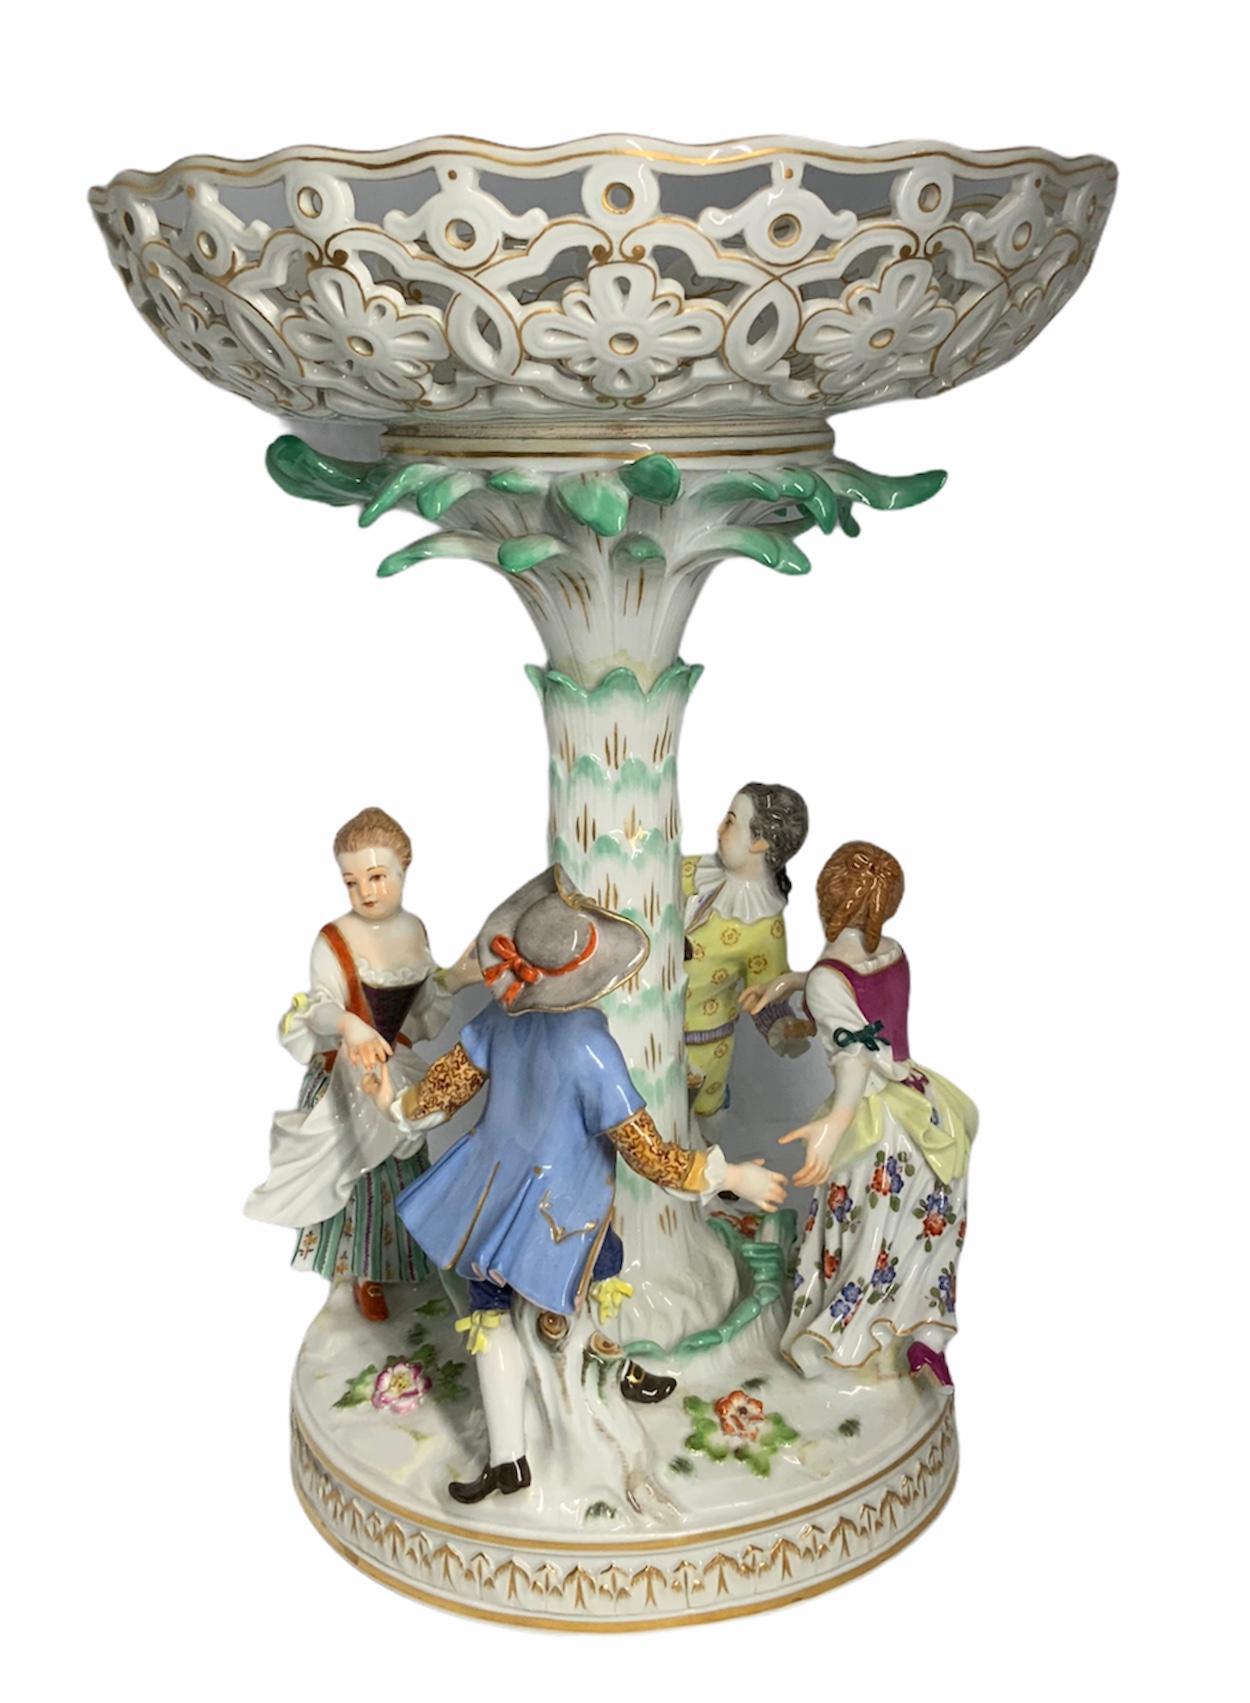 This is a Meissen porcelain centerpiece depicting a group of children holding hands & dancing around a tall palm tree. This serves as a pedestal base to the decorated and reticulated wide compote that is embellished with flowers & scrolls. The